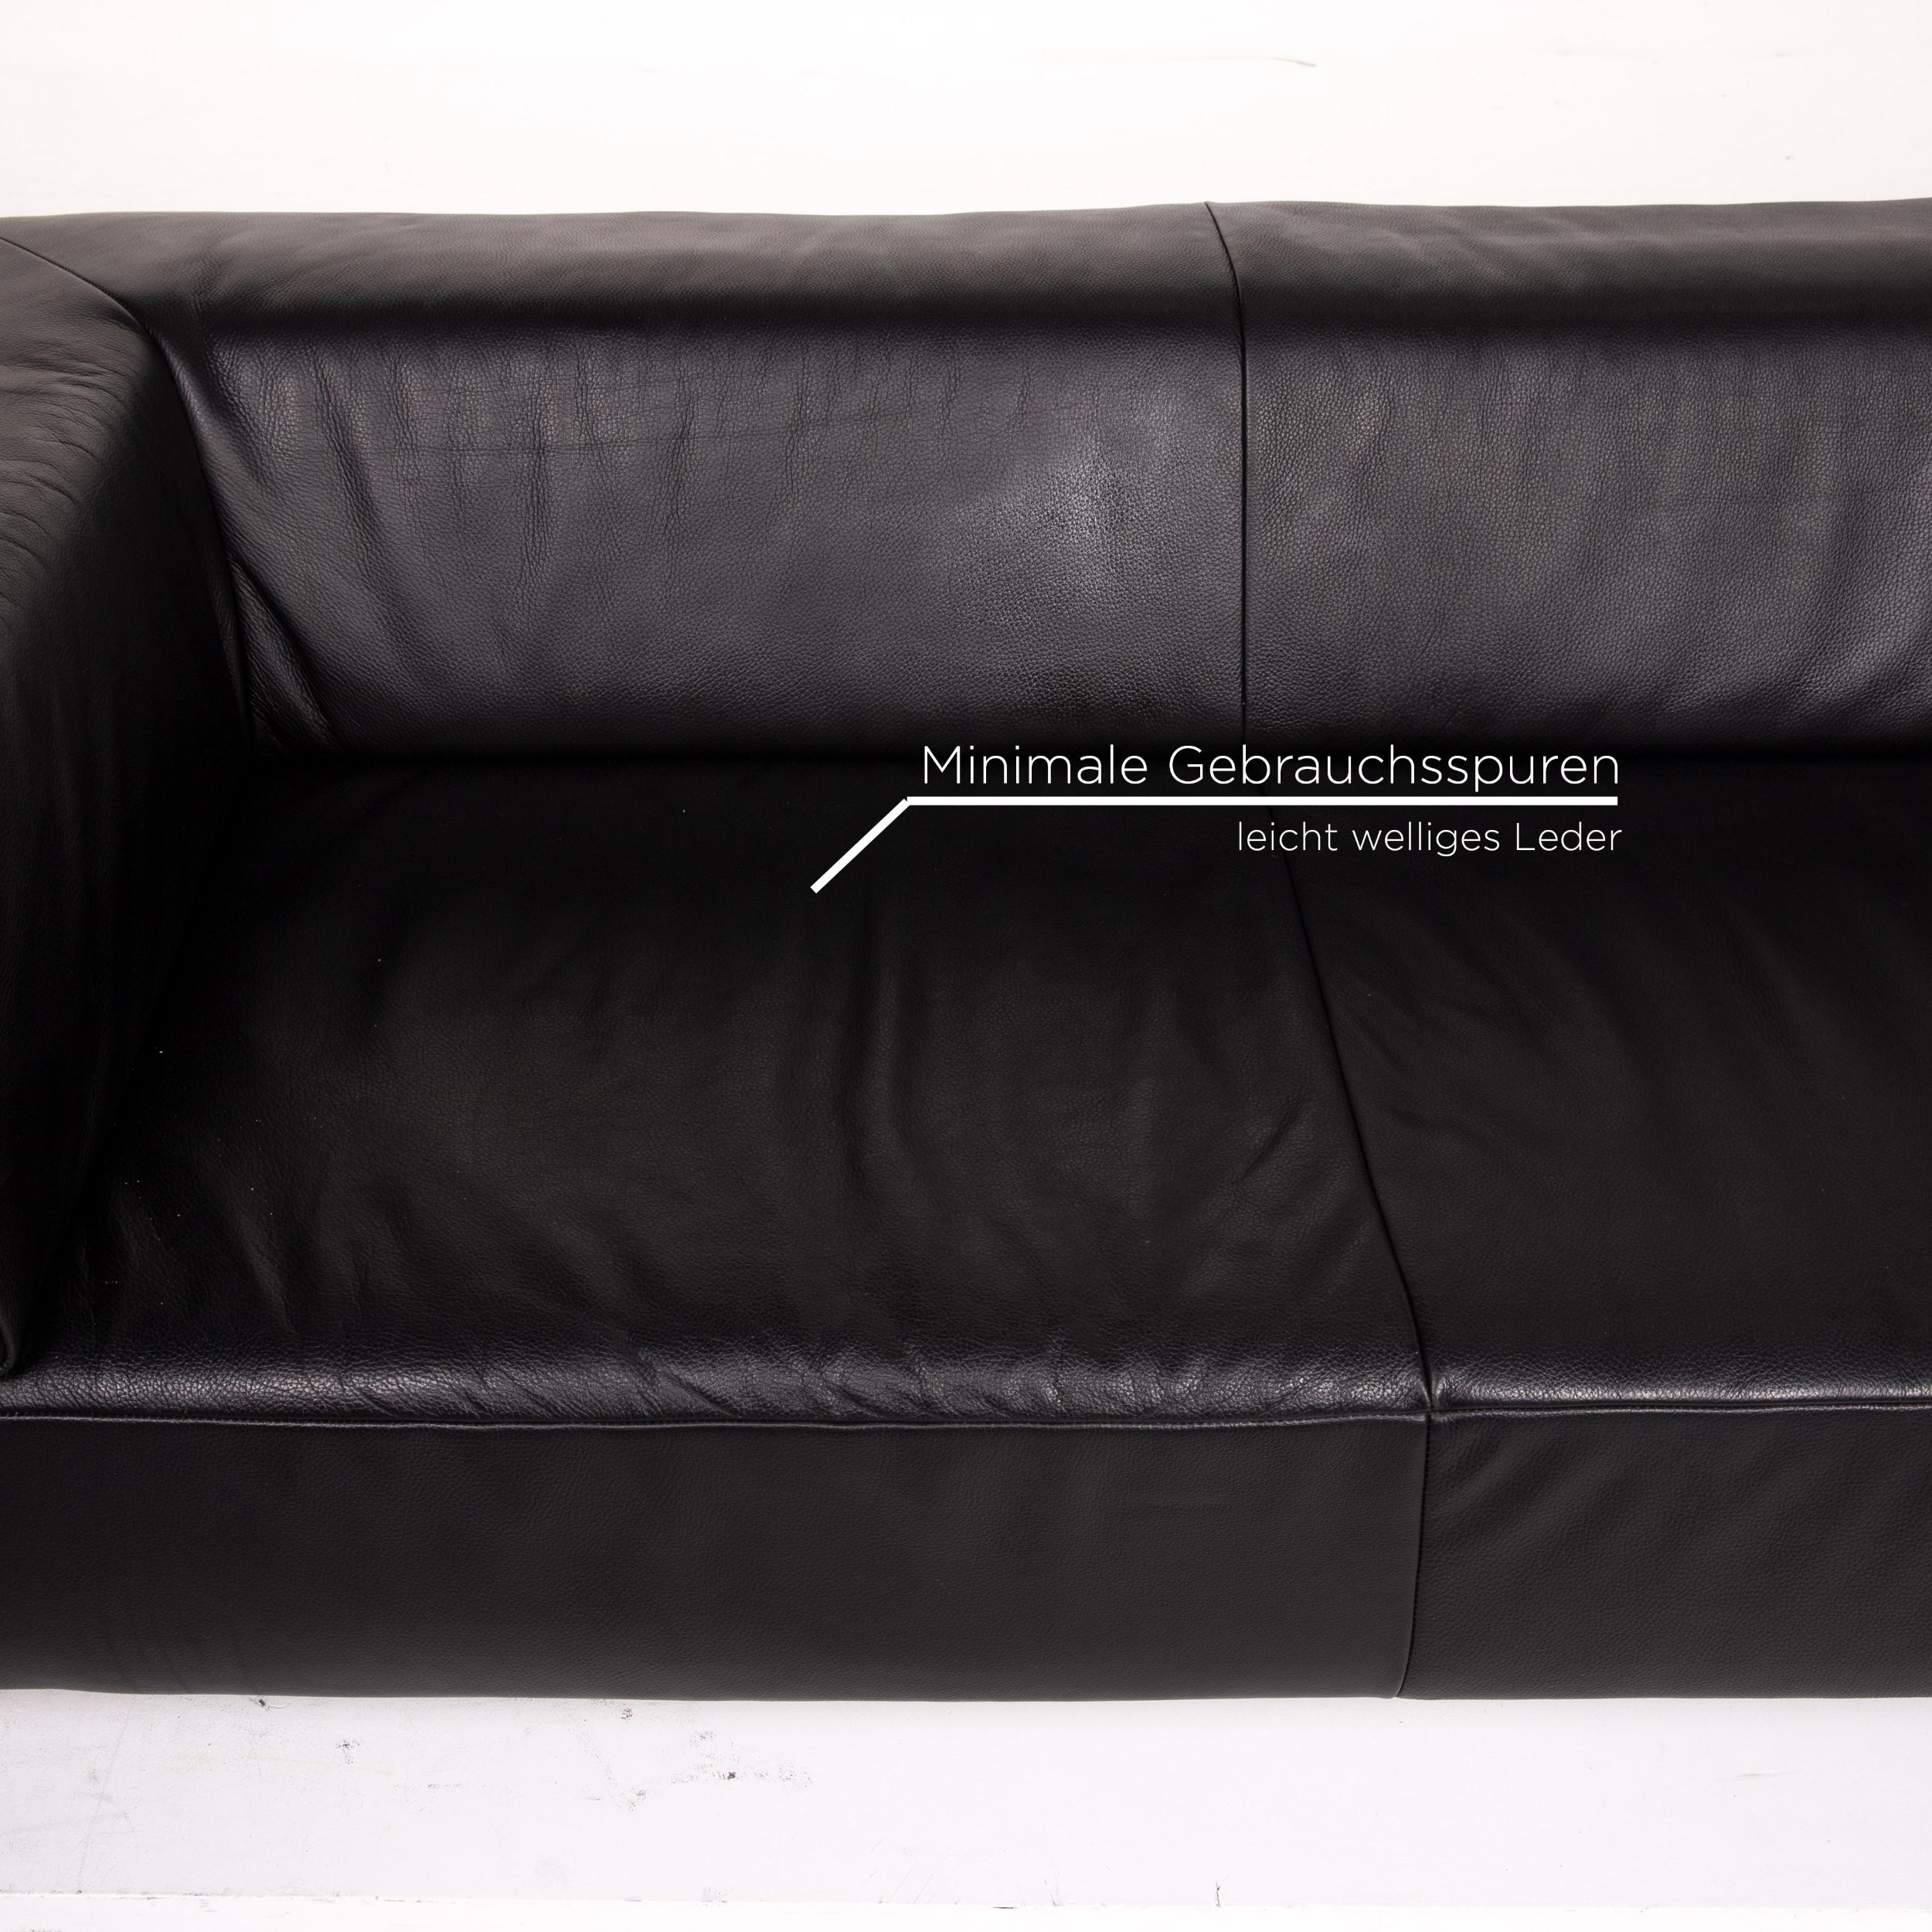 German Koinor Genesis Leather Sofa Black Two-Seat Couch